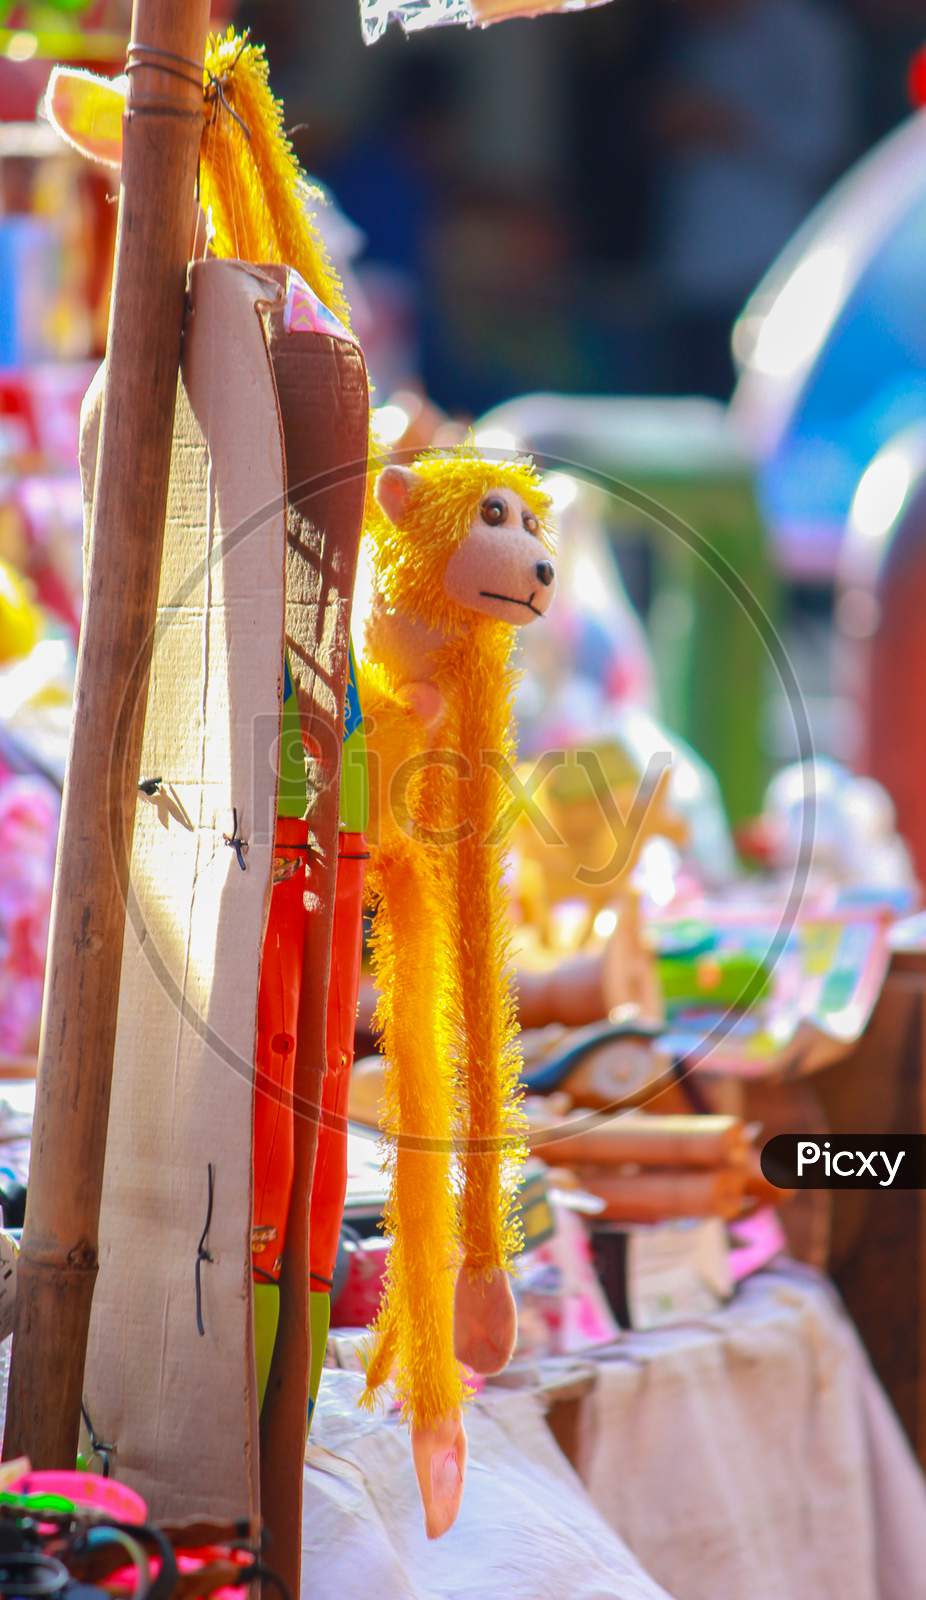 Yellow Monkey toys selling on the street of Sonargaon, Dhaka, Bangladesh in front of a world heritage site.